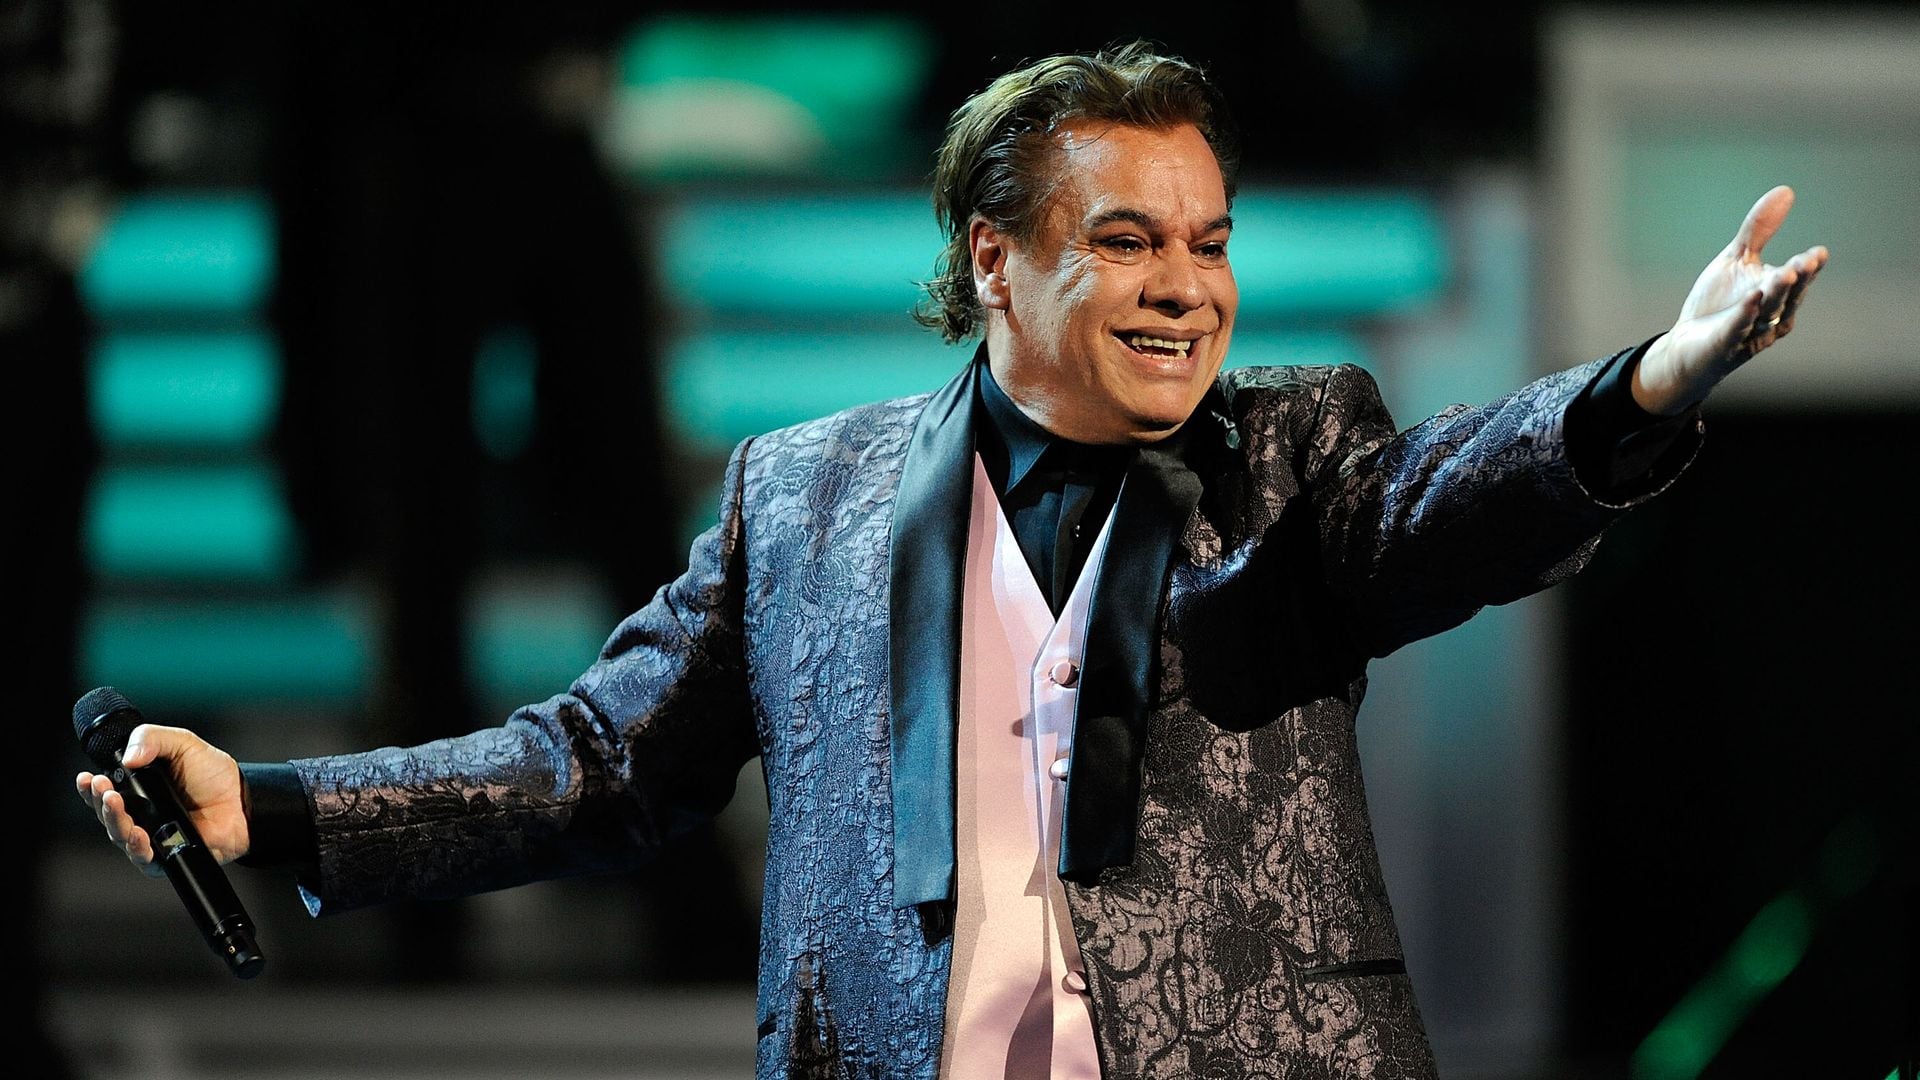 Singer Juan Gabriel performs onstage during the 10th annual Latin GRAMMY Awards held at Mandalay Bay Events Center on November 5, 2009, in Las Vegas, Nevada.  (Photo by Ethan Miller/Getty Images)